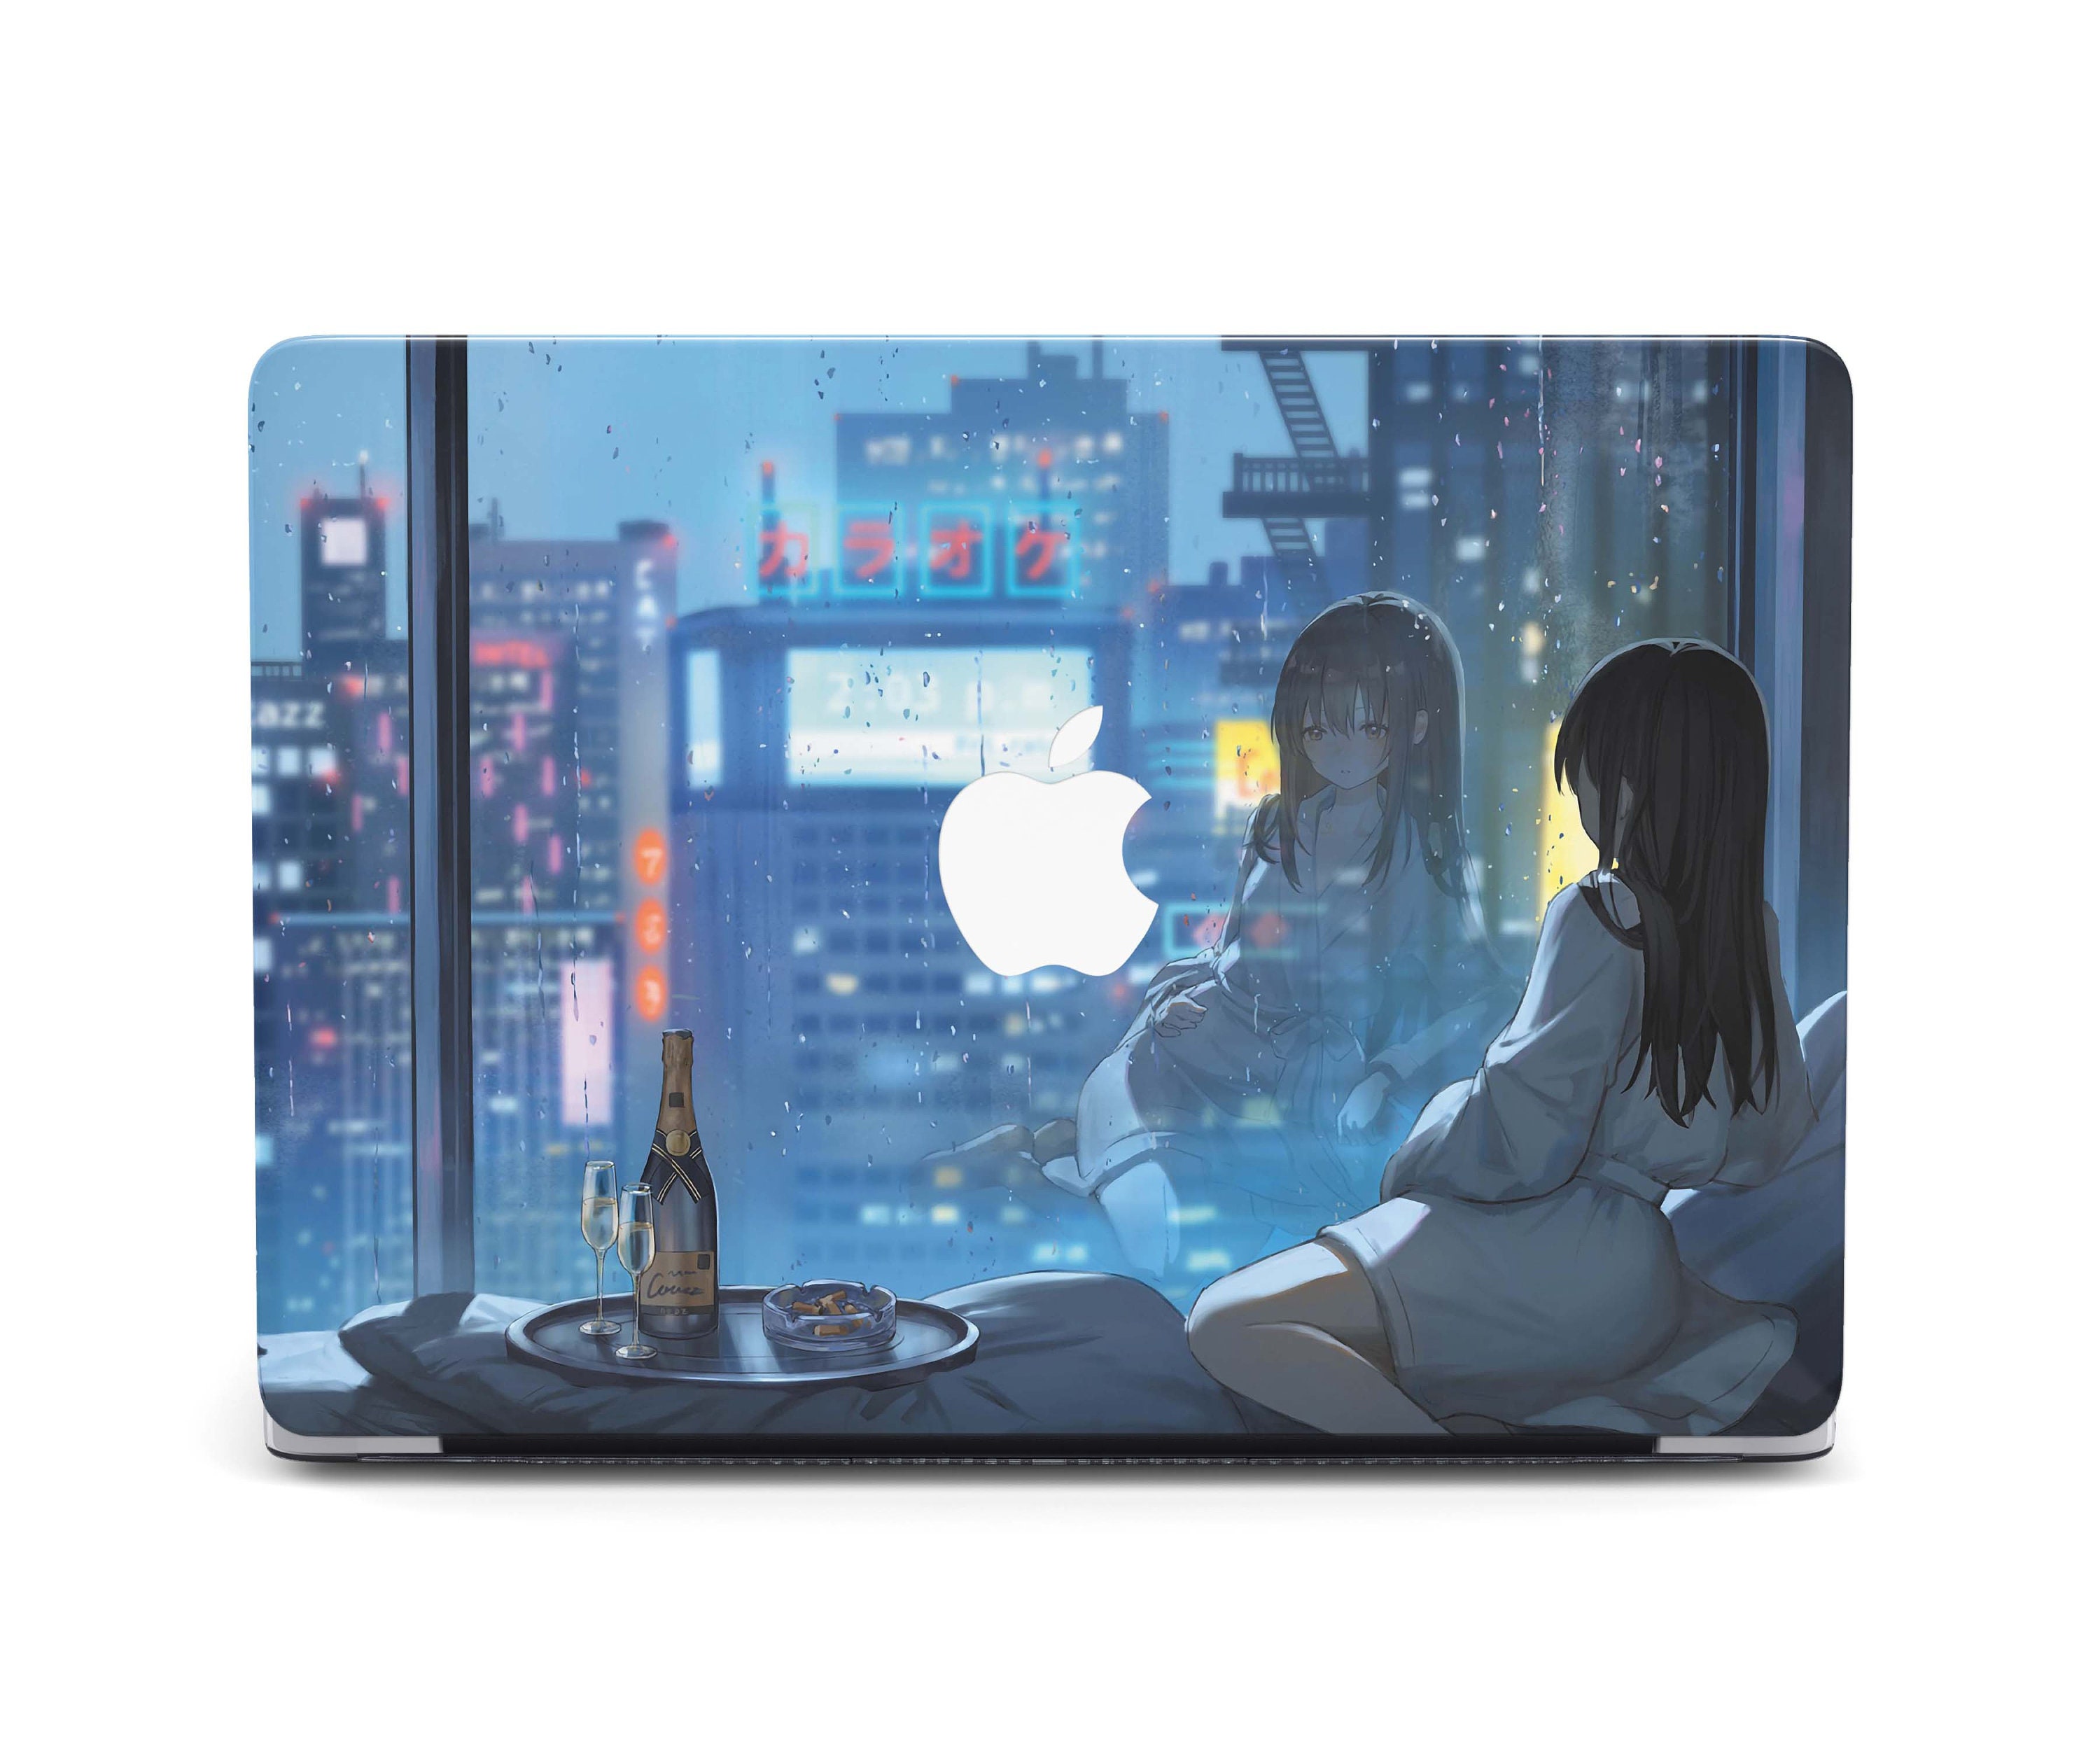 Popular Anime One Piece MacBook Air 13 Inch Case Laptop Cover Protective  Case for MacBook Air 13 Model New Air13  Amazonin Computers  Accessories